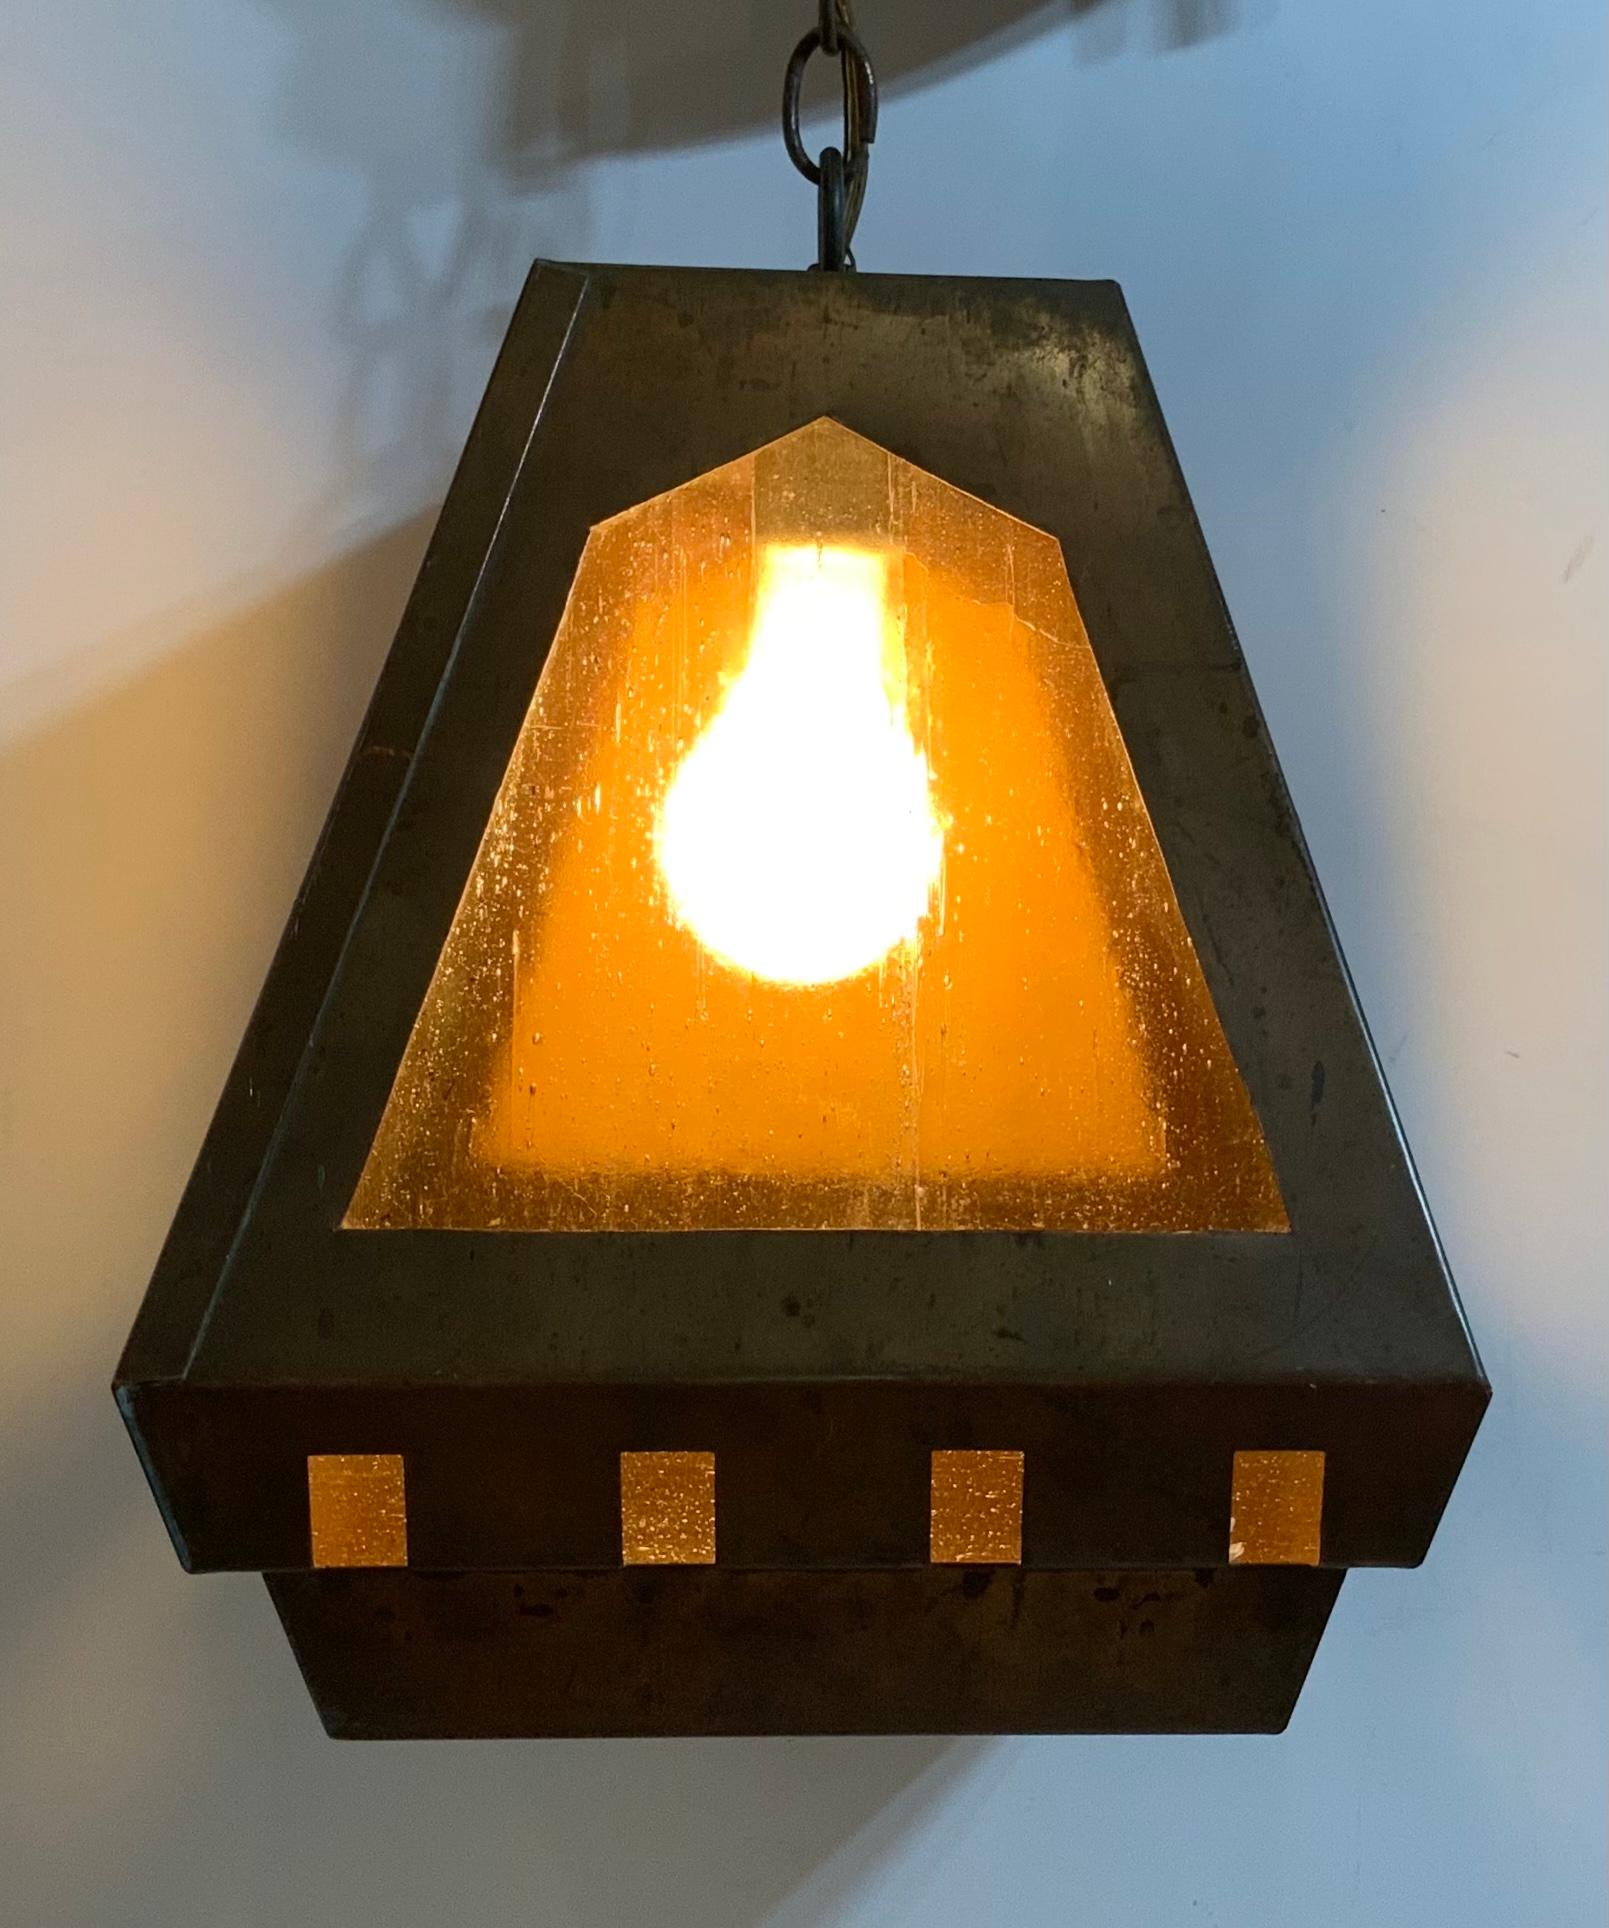 Elegant lantern made of hand crafted copper, quality workmanship, four sides of art glass, and one 60/watt light. Suitable for wet location, original canopy and chain is included.
One more available upon request.